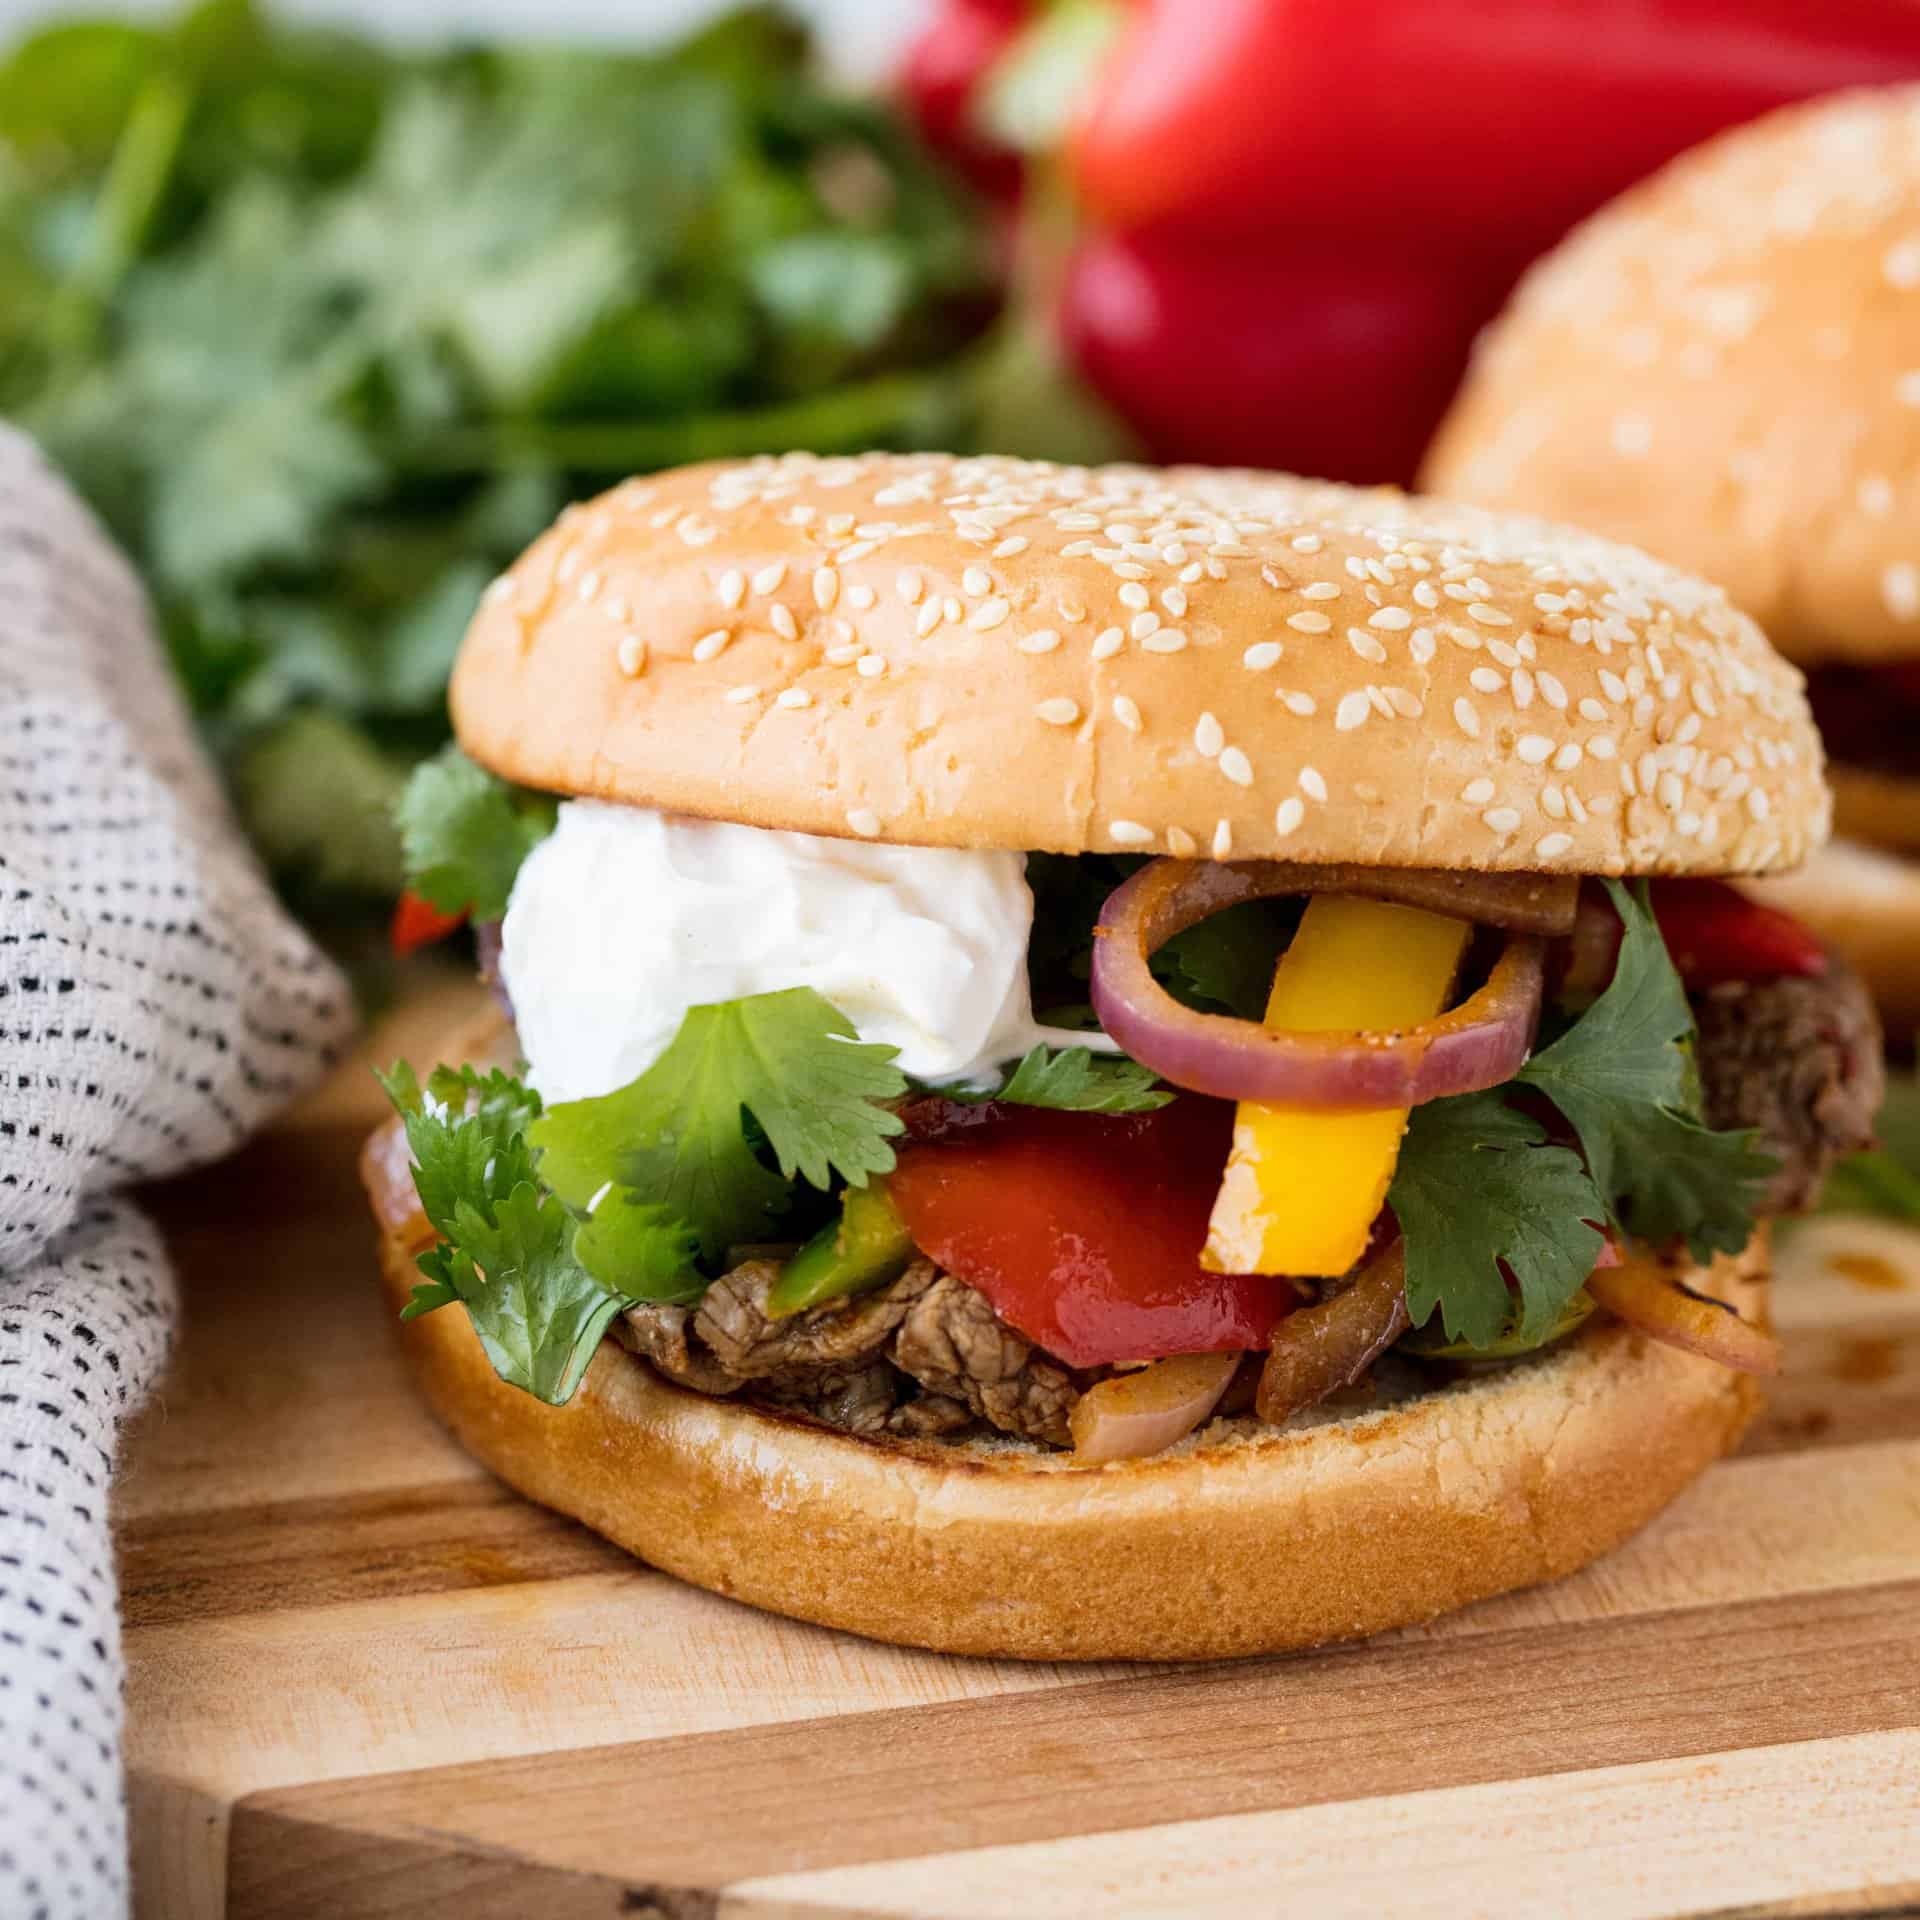 Fajita Burgers take all the flavors of fajitas that you love and combines it into a delicious burger that's perfect for any backyard barbecue!